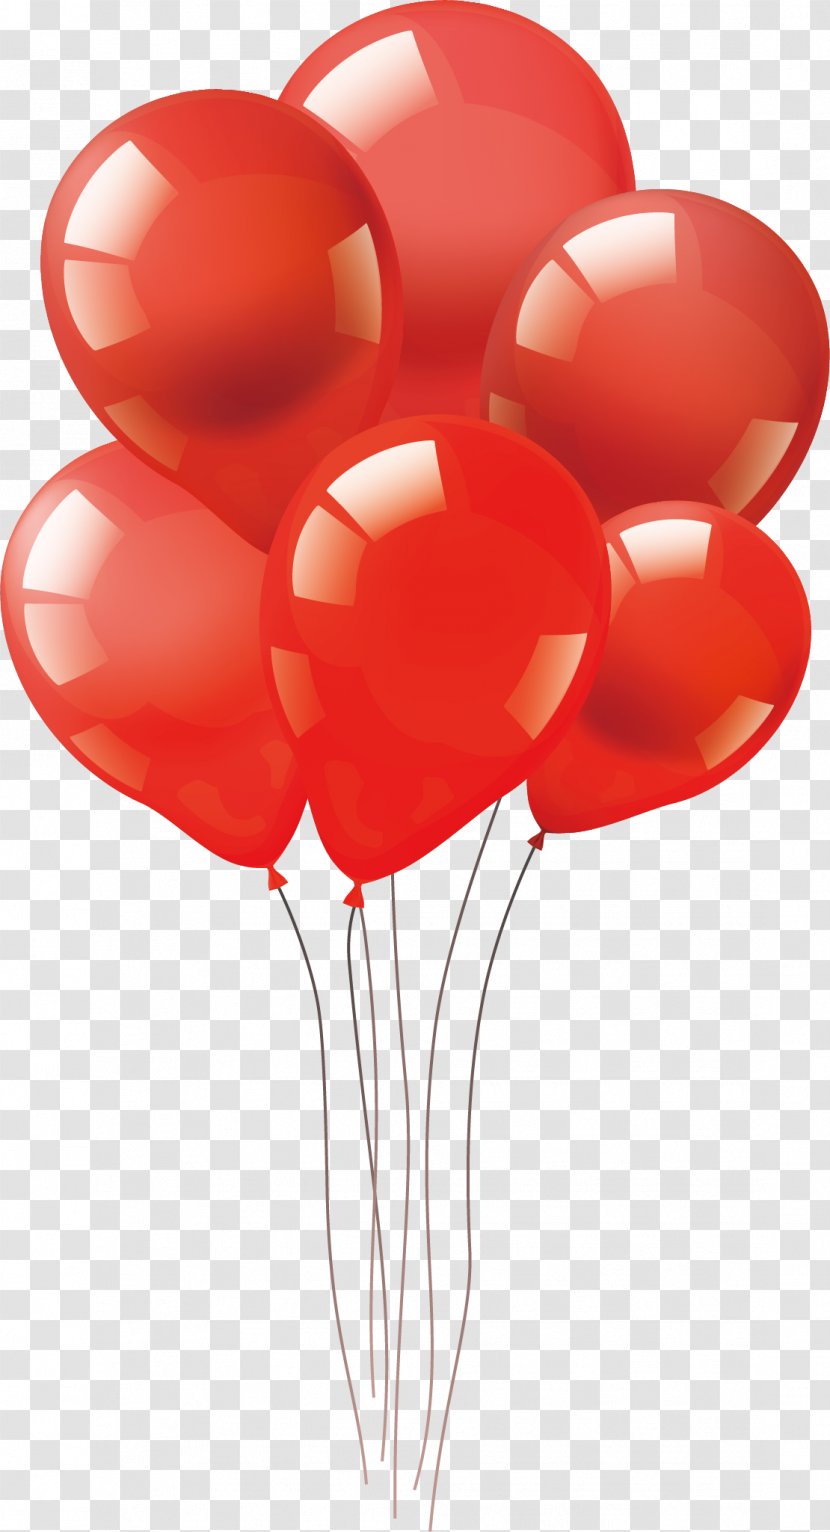 Balloon - Love - Vector Hand-painted Red Transparent PNG